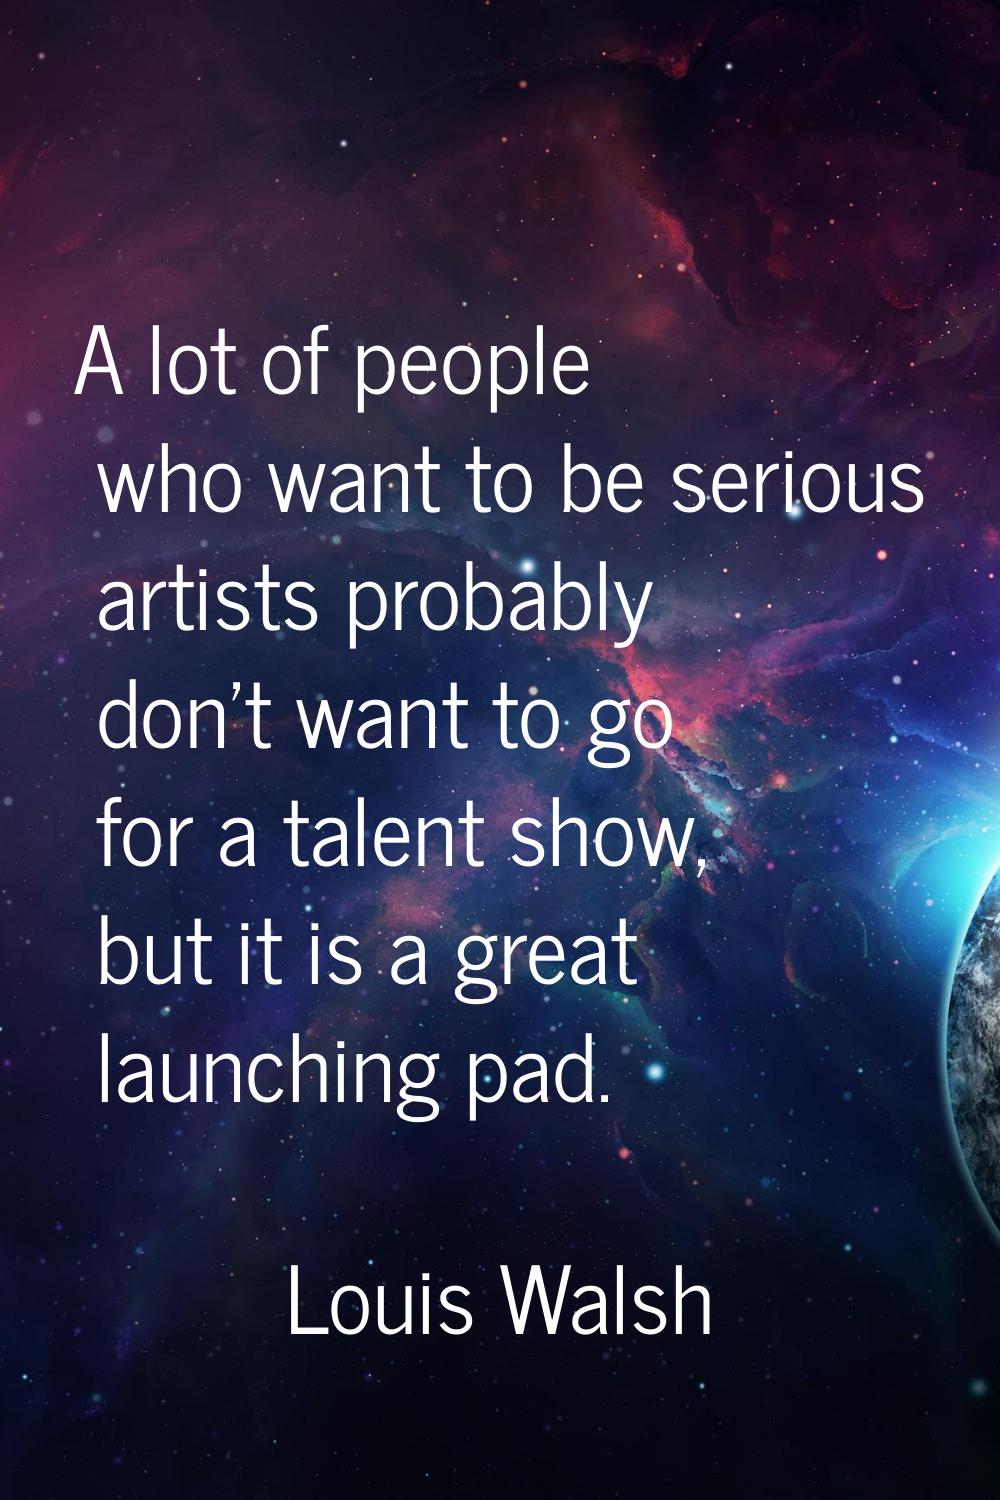 A lot of people who want to be serious artists probably don't want to go for a talent show, but it 